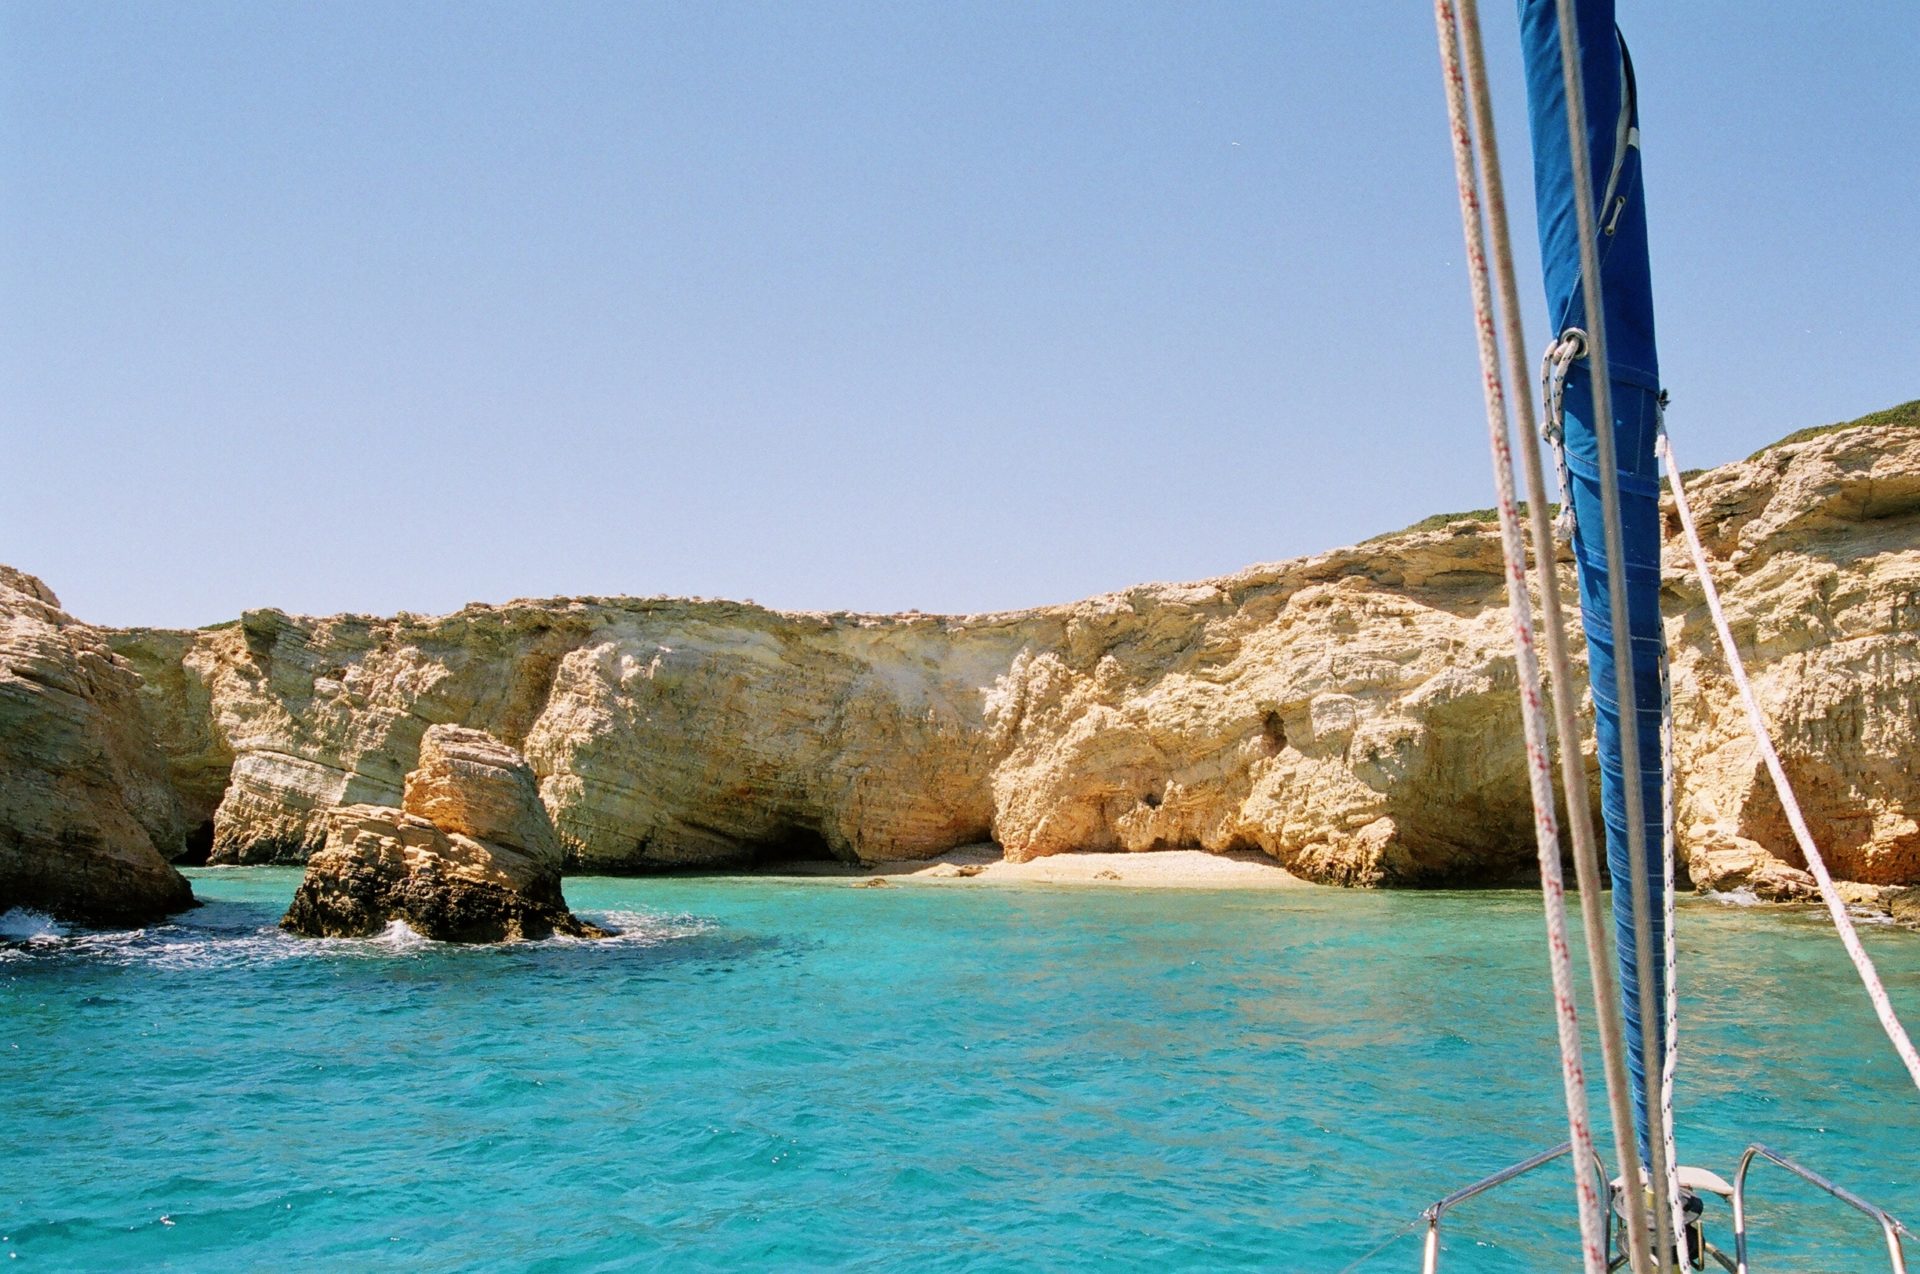 discover unspoiled beaches accessible only by boat